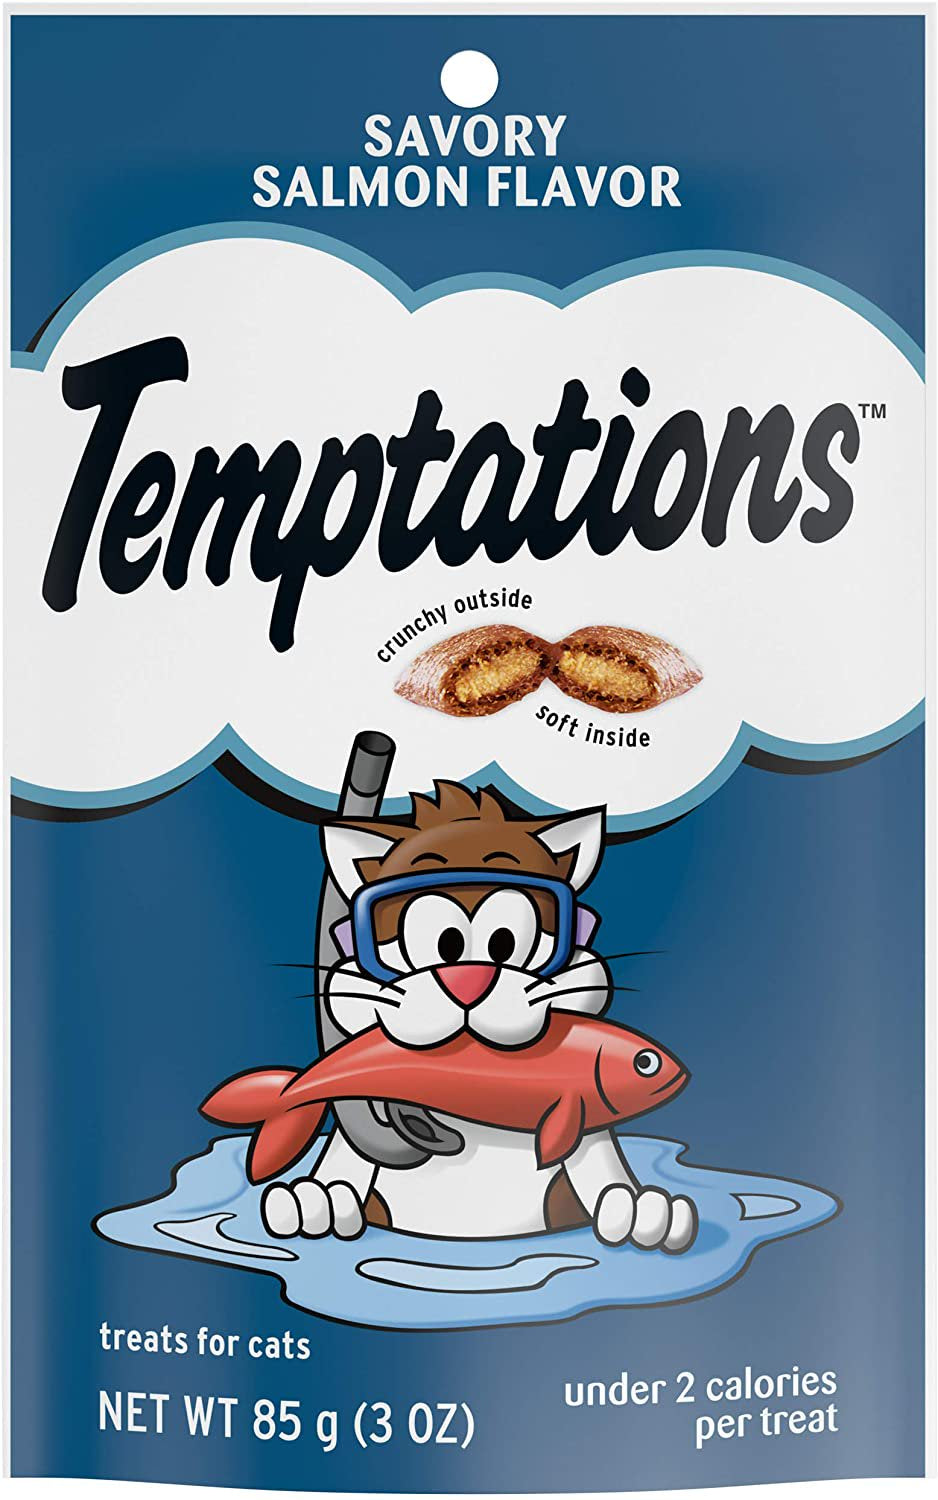 Temptations Cat Treats Variety Pack, Bundle of 7 Flavors (Chicken, Tuna, Salmon, Turkey, Beef, Creamy Dairy and Seafood Medley) with a Pair of Cat Grooming Gloves